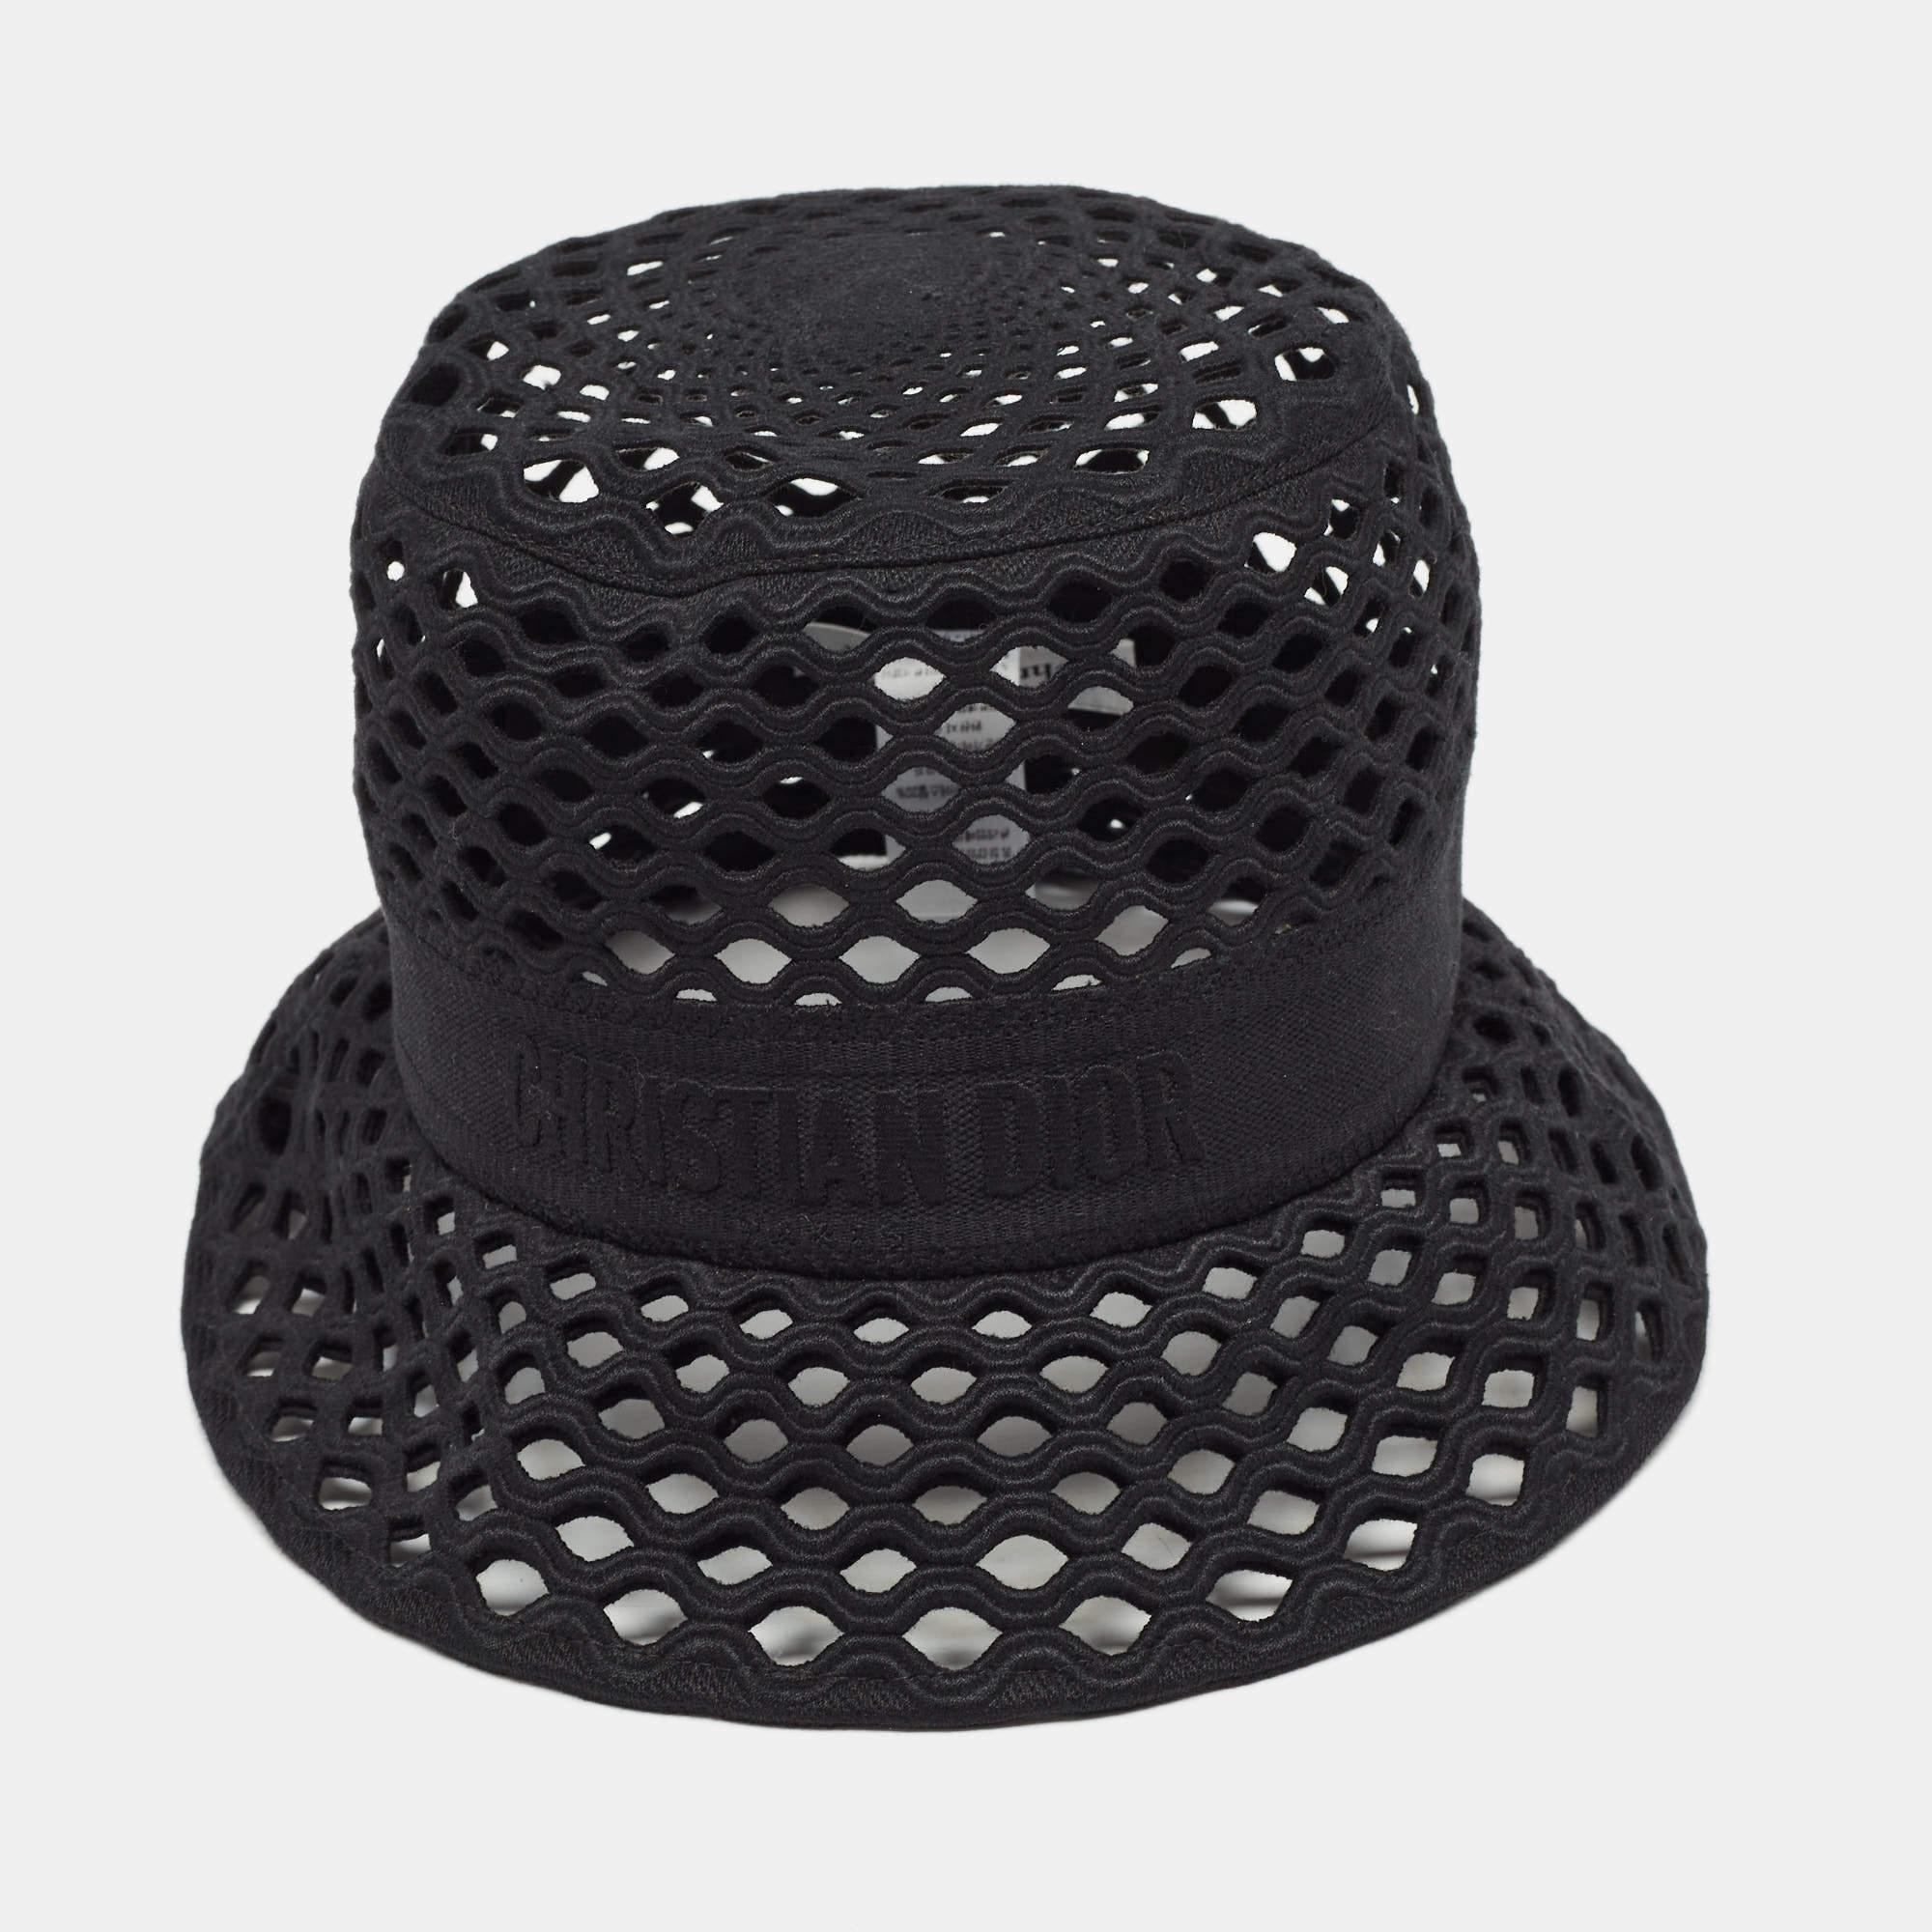 The Dior bucket hat seamlessly combines style and functionality. Crafted from high-quality black mesh, it features the iconic Dior logo embroidered on the front. With a comfortable and breathable design, this hat is a versatile accessory that